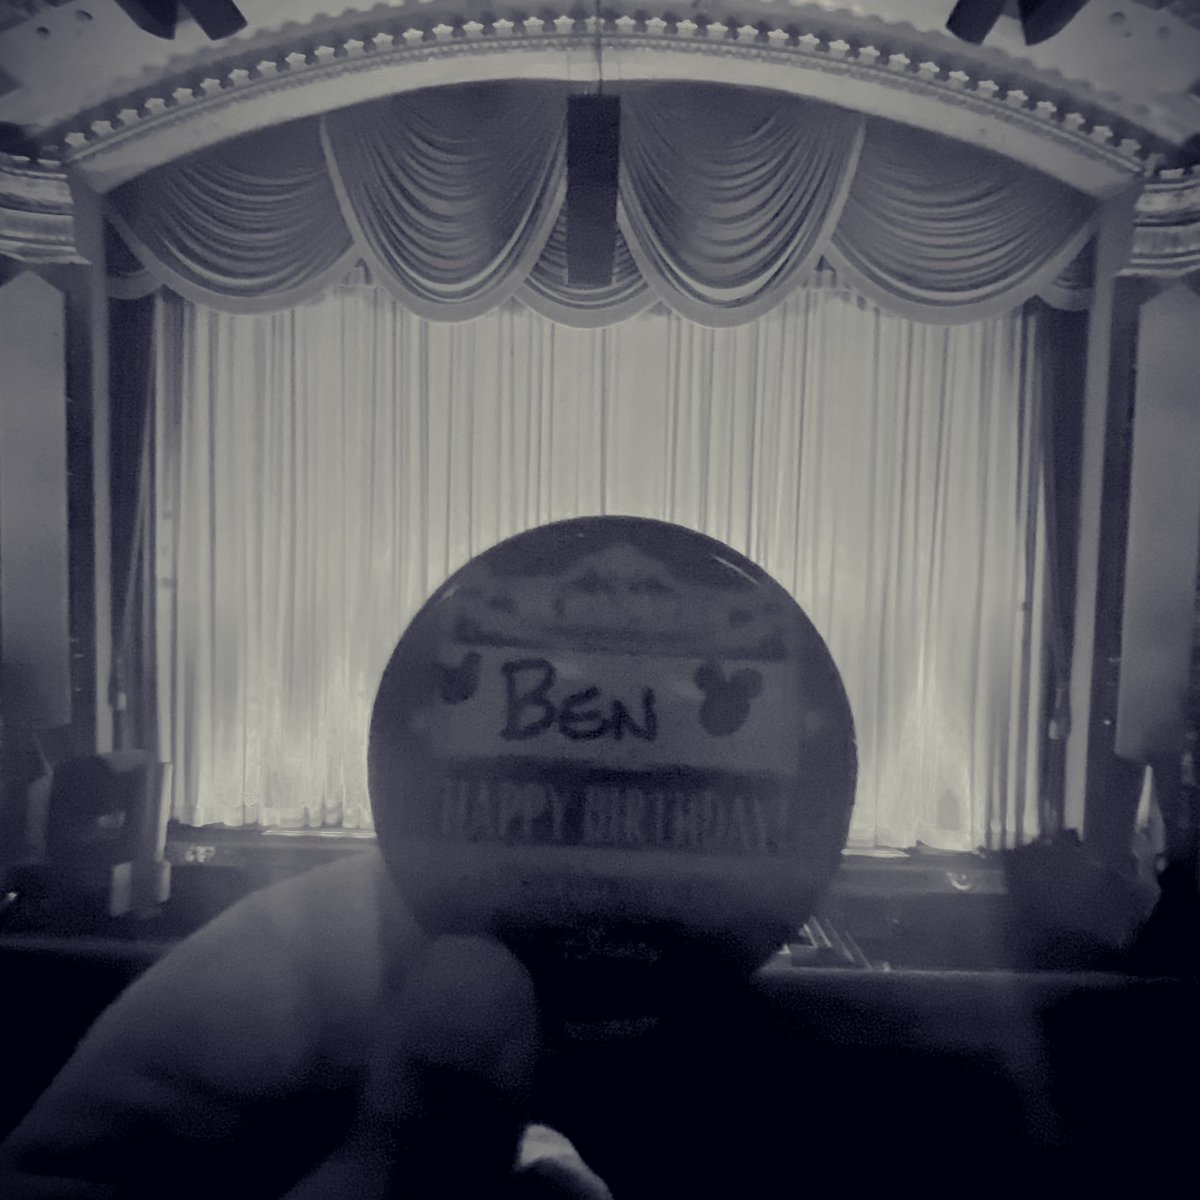 To paraphrase Rancid: “When I’ve got the movies, I’ve got a place to go.” 📽️🎞️🍿

#ElCapitanTheatre #TurningRed #Disney #HappyBirthday #Level35